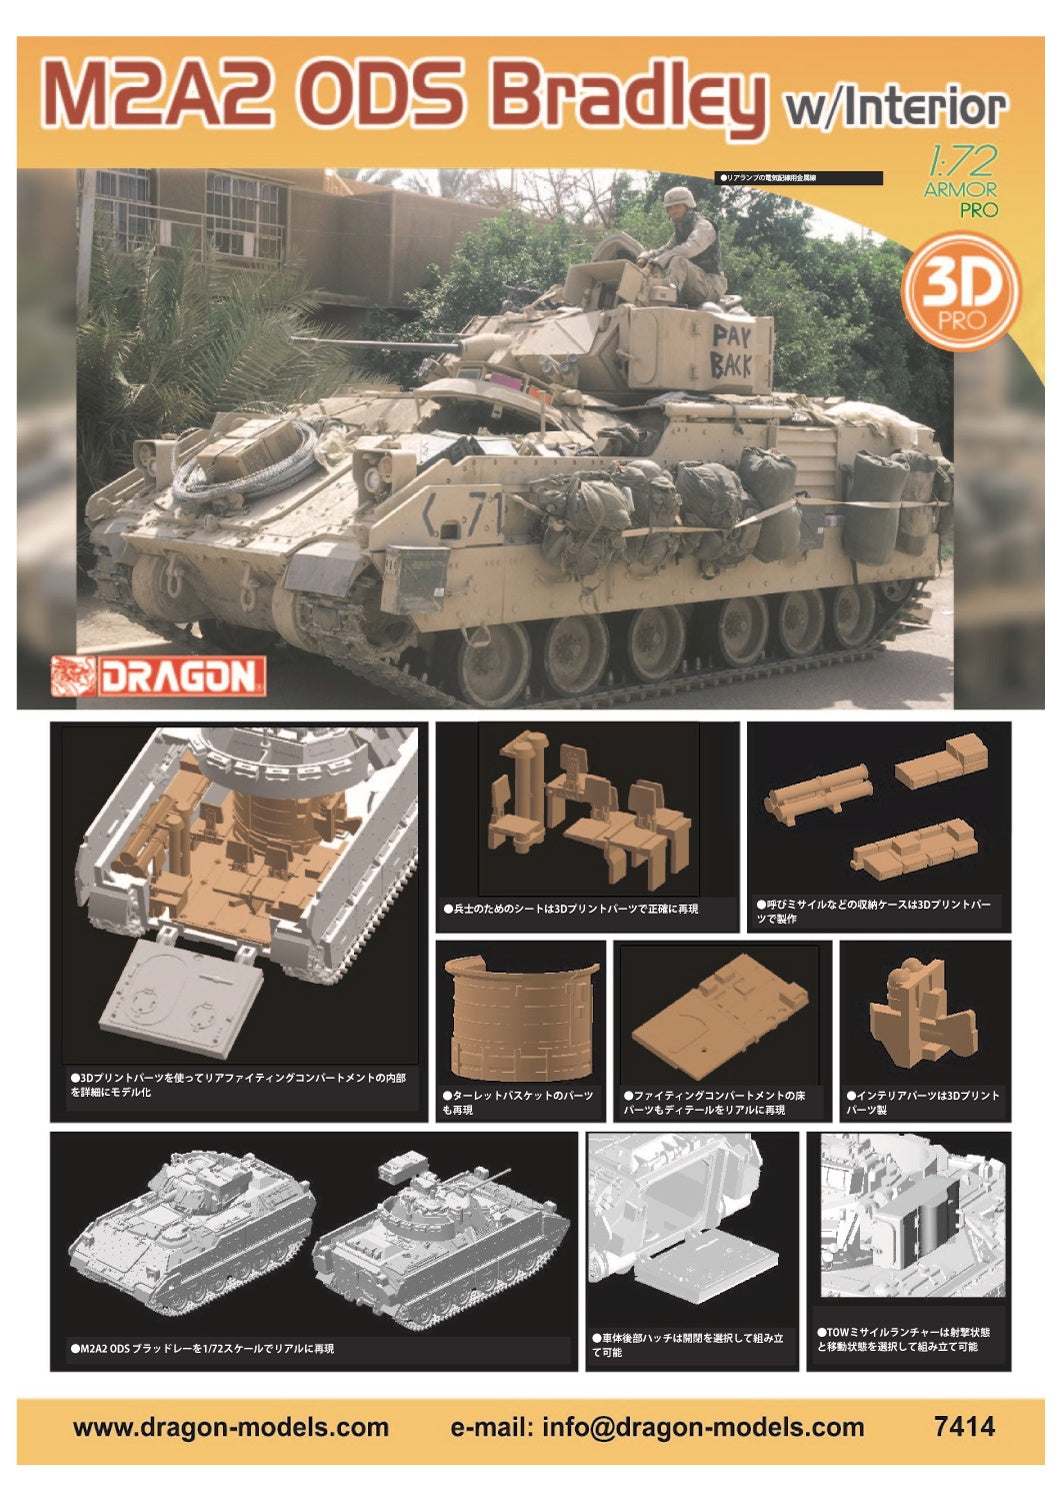 Dragon 1/72 US Army M2A2 Bradley ODS Interior 3D Printed Parts Included